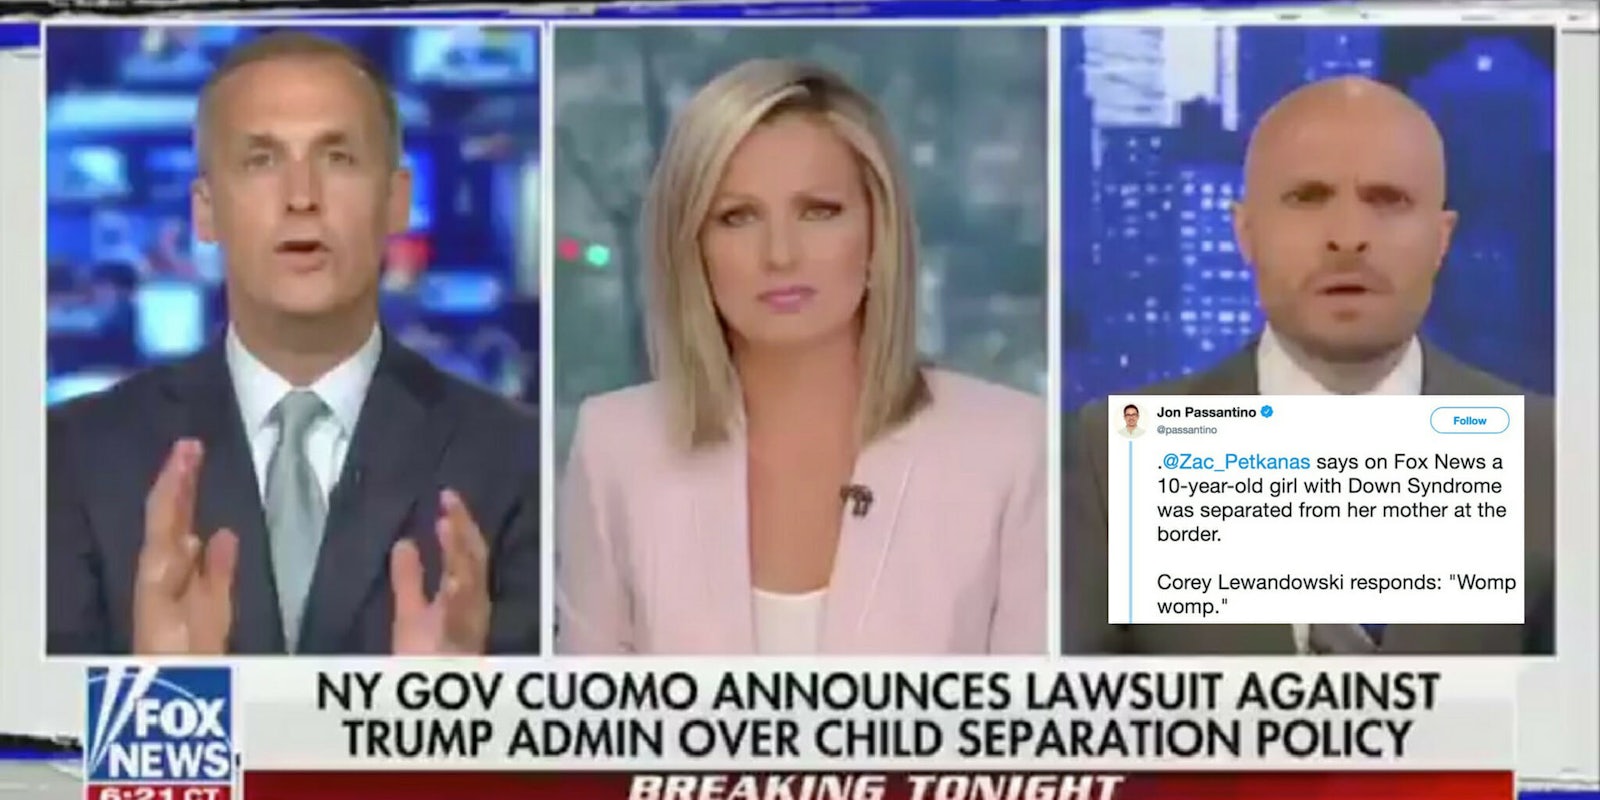 Corey Lewandowski says 'womp womp' in response to Zac Petkanas' story about a girl with Down syndrome separated from her parents.